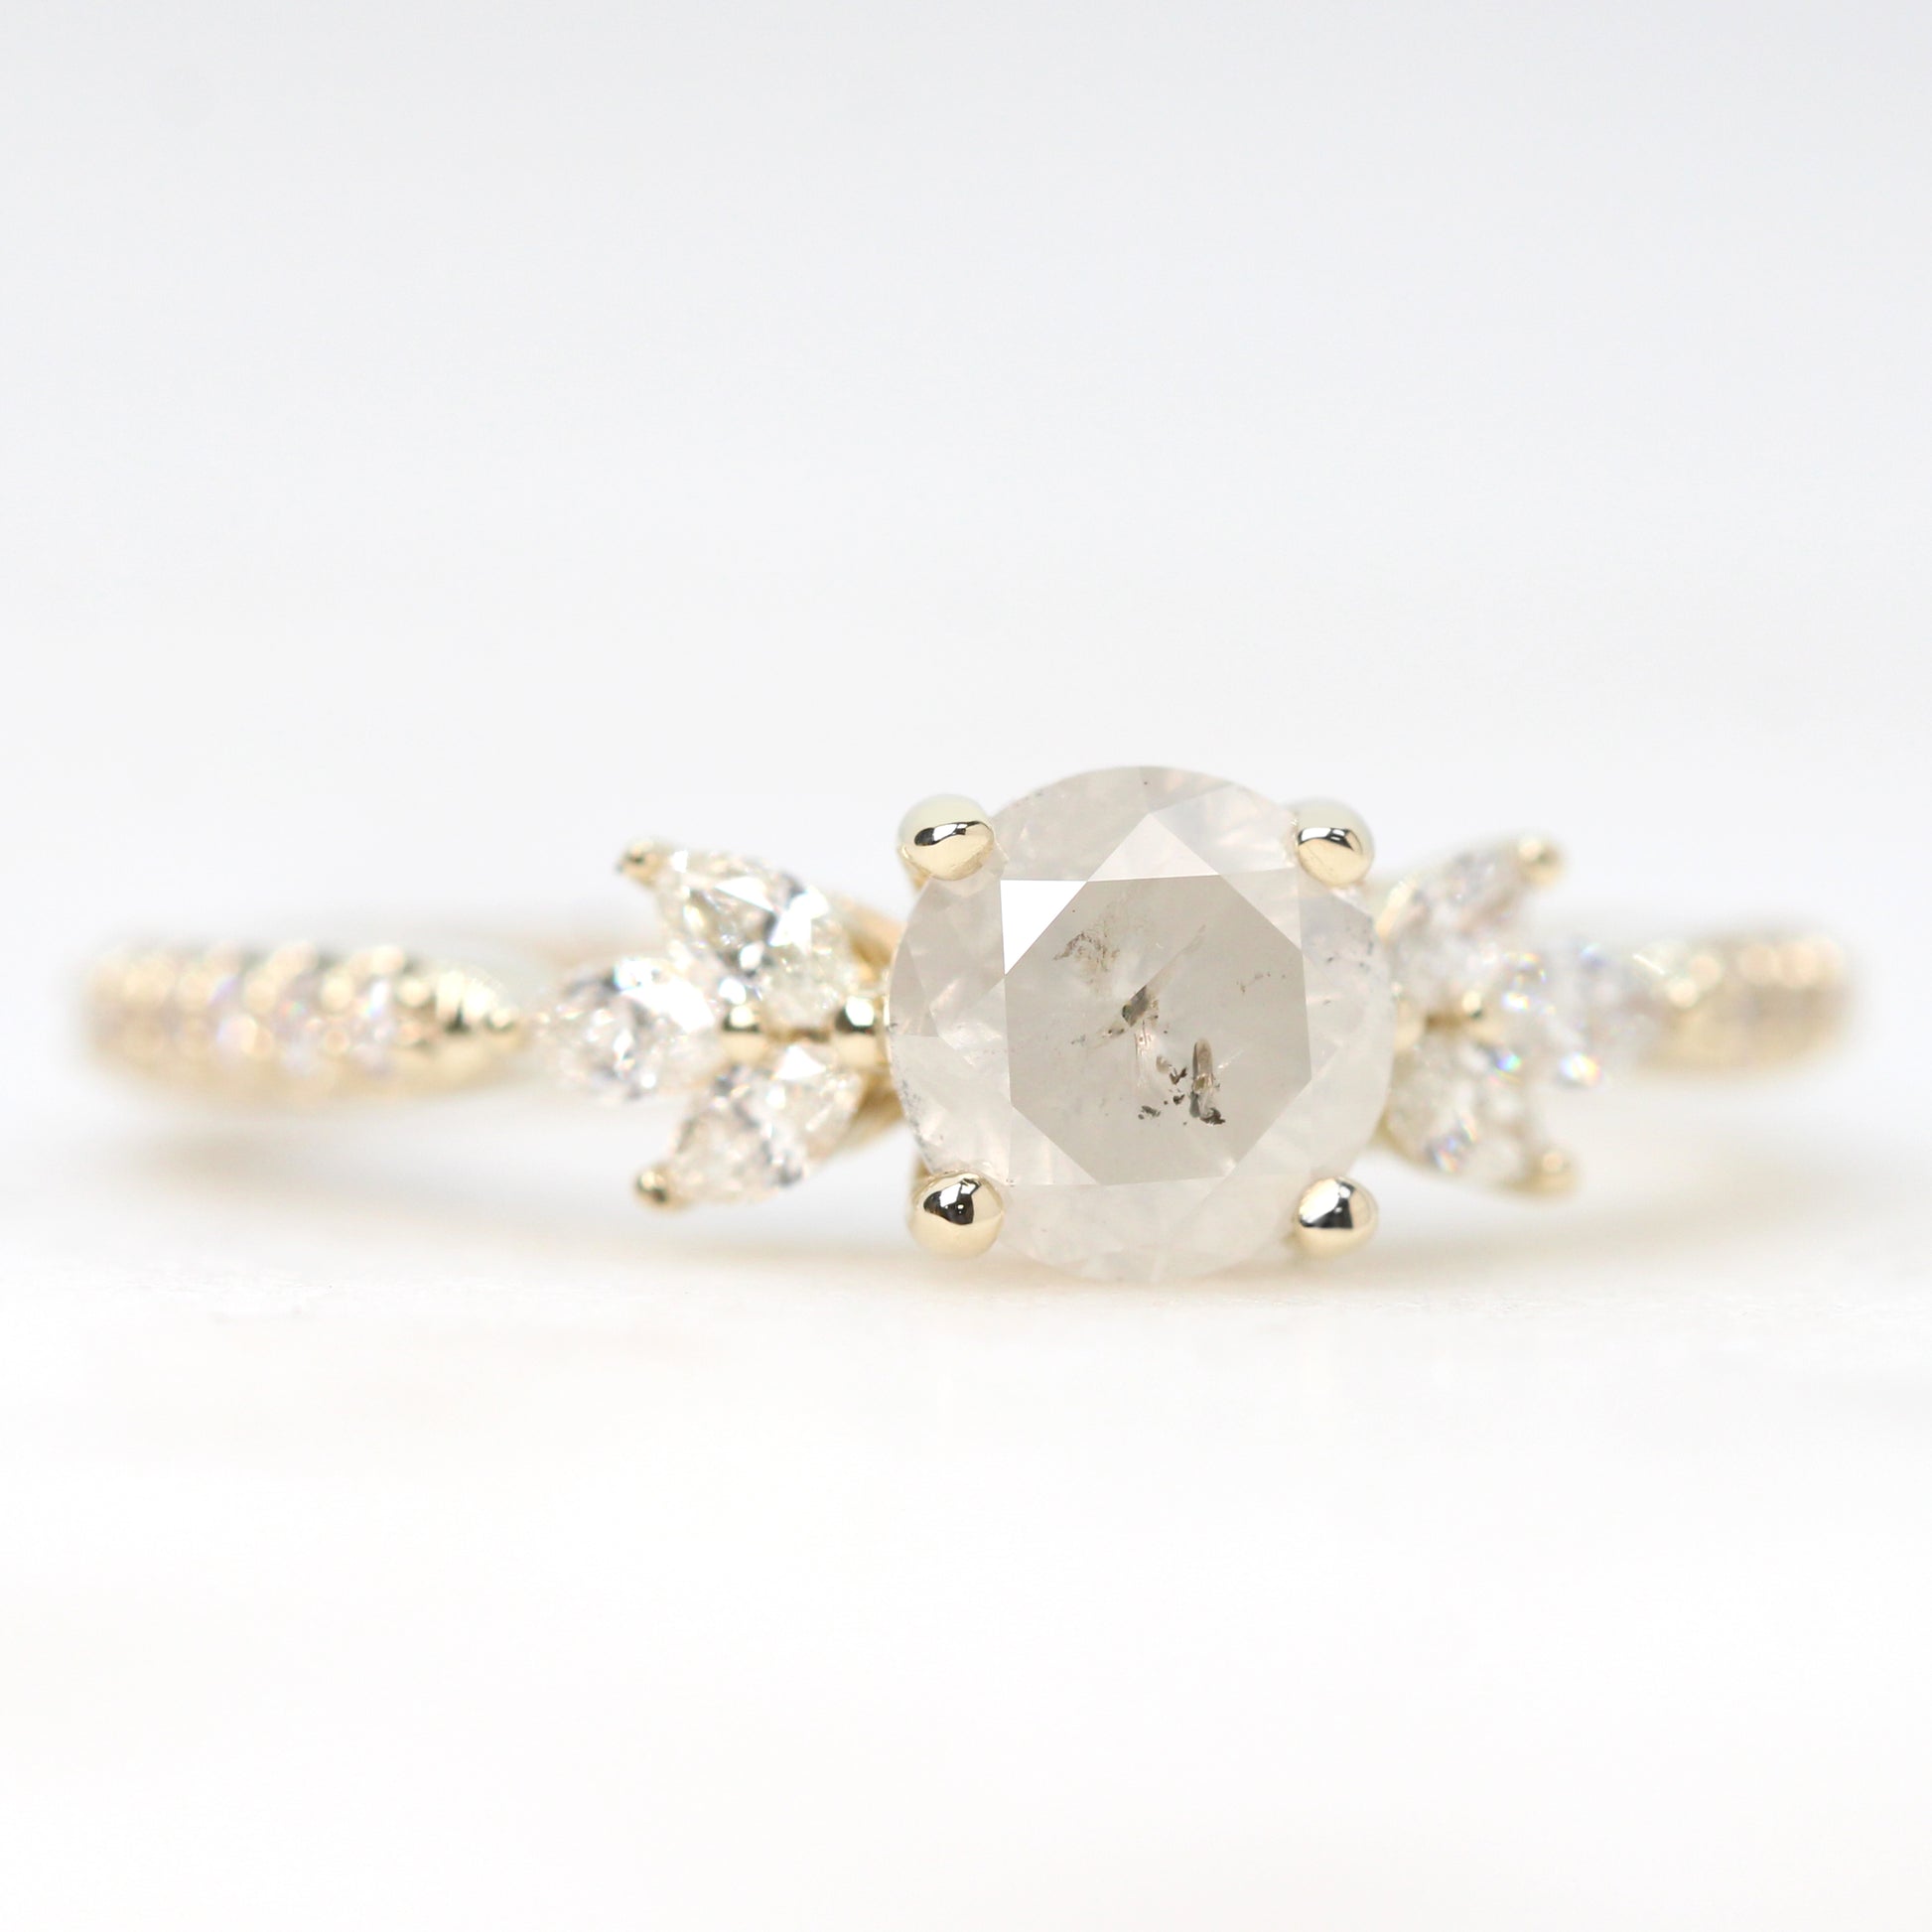 Betty Ring with a 0.97 Carat Round Misty White Salt and Pepper Diamond and White Accent Diamonds in 14k Yellow Gold - Ready to Size and Ship - Midwinter Co. Alternative Bridal Rings and Modern Fine Jewelry